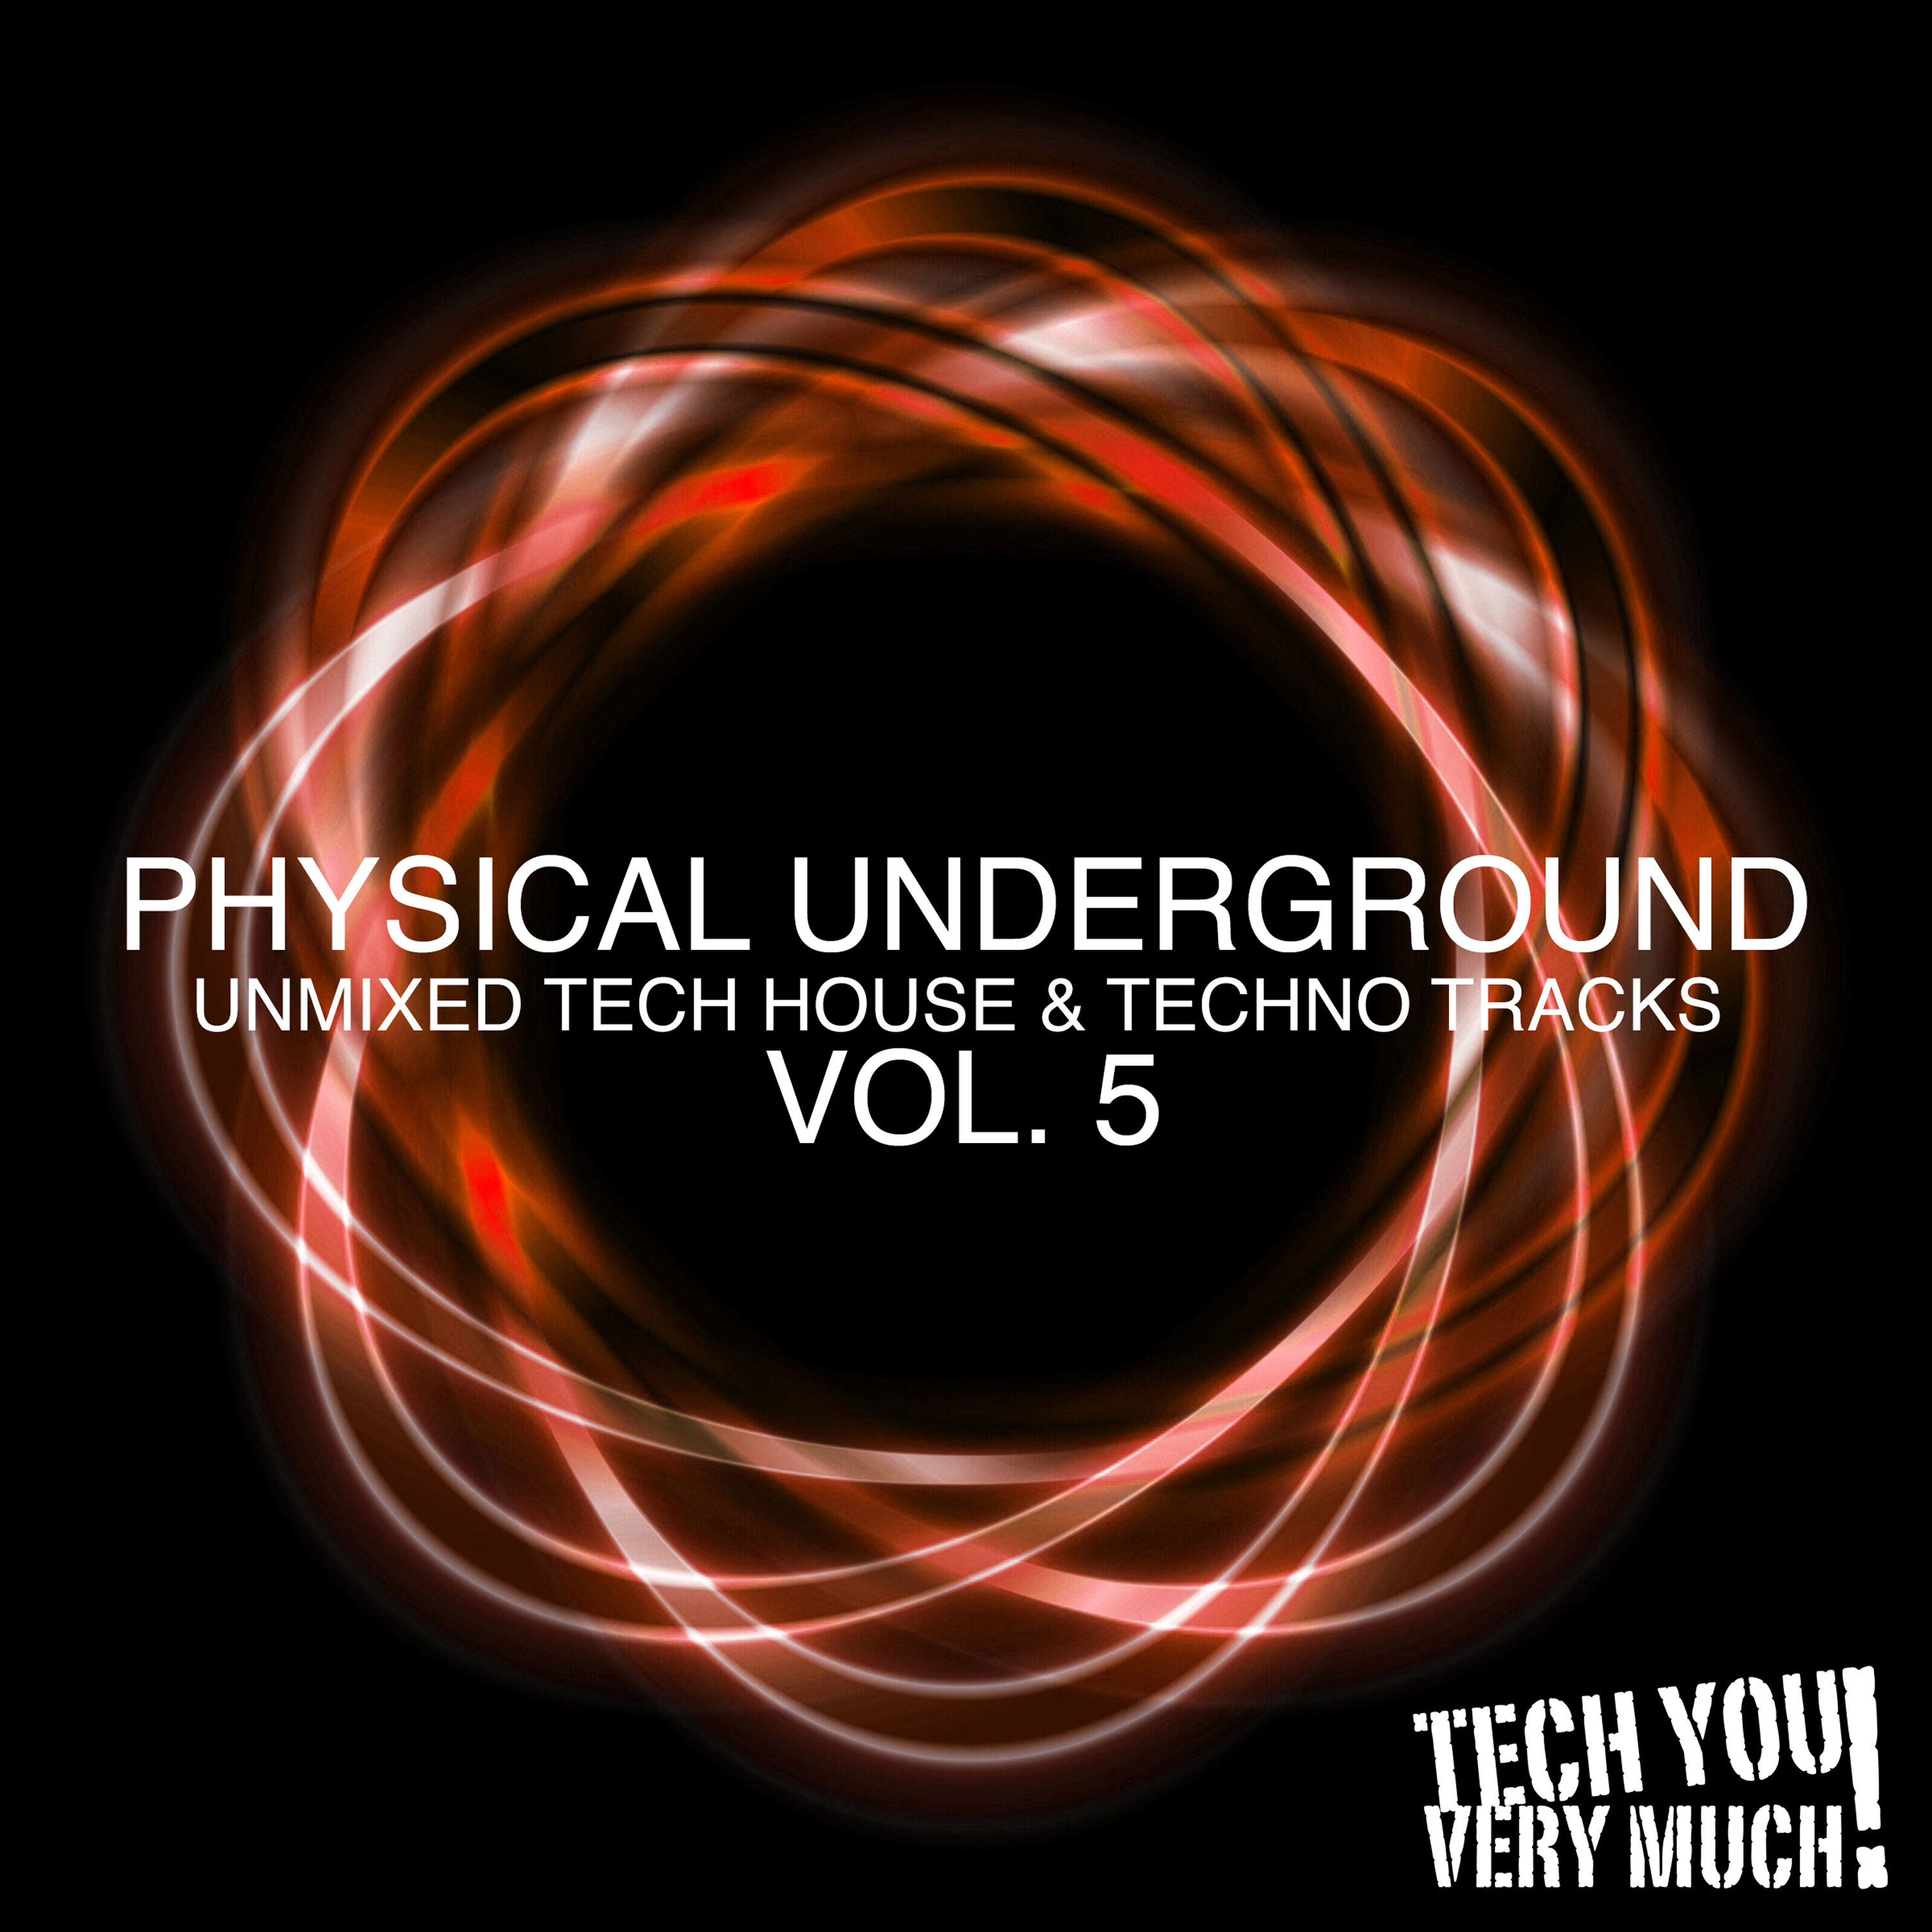 Physical Underground, Vol. 5 (Unmixed Tech House & Techno Tracks)